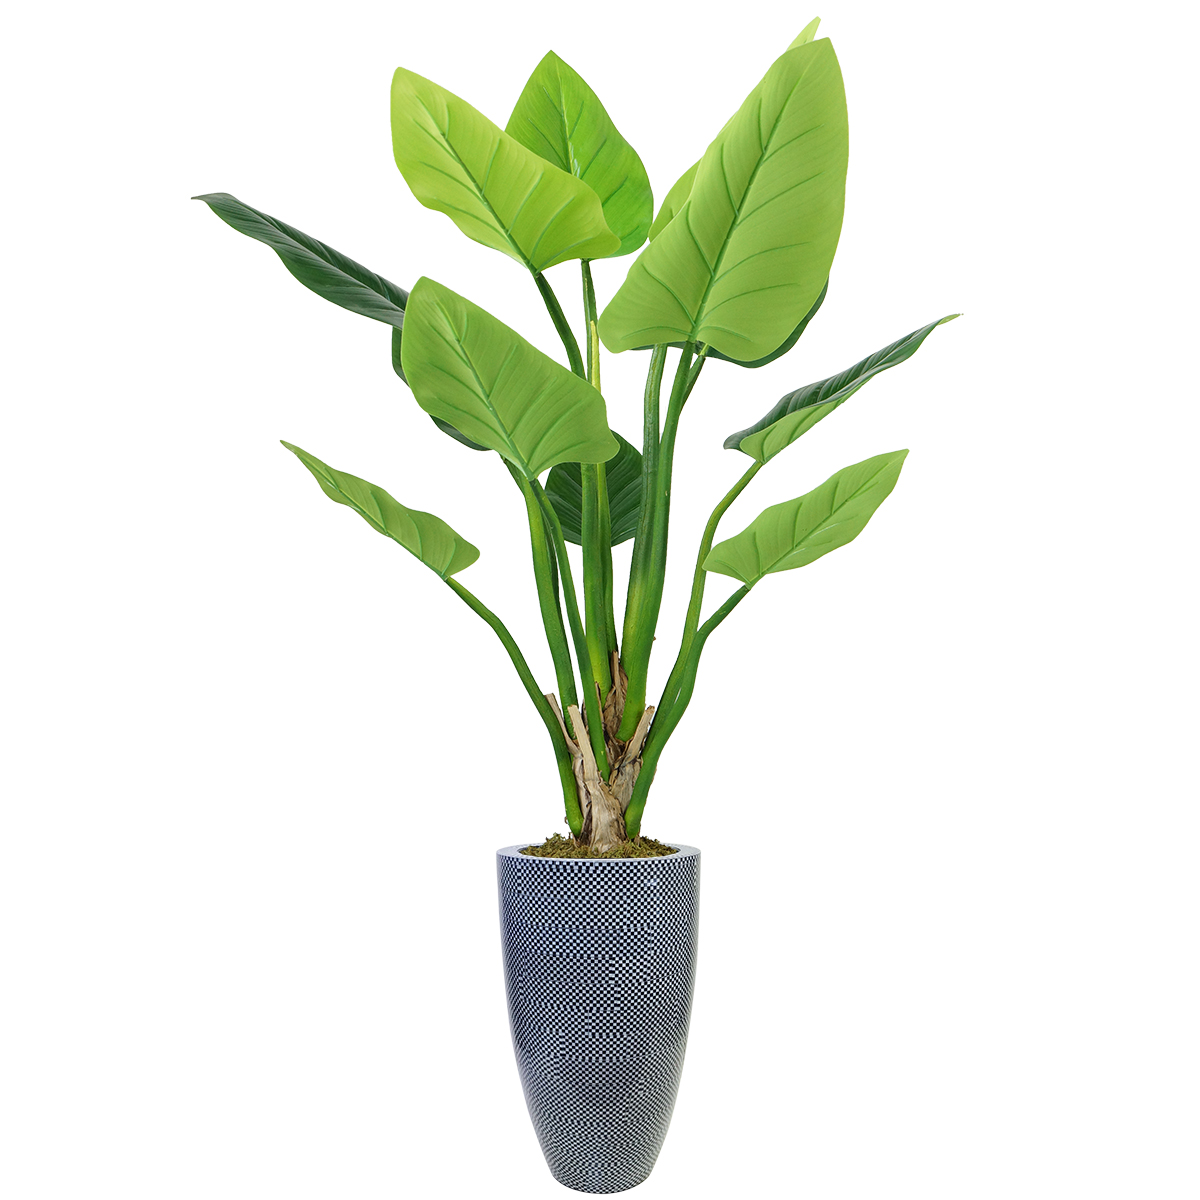 Vhx136223 65.5 In. Philodendron Erubescens Green Emerald Plant In Resin Planter